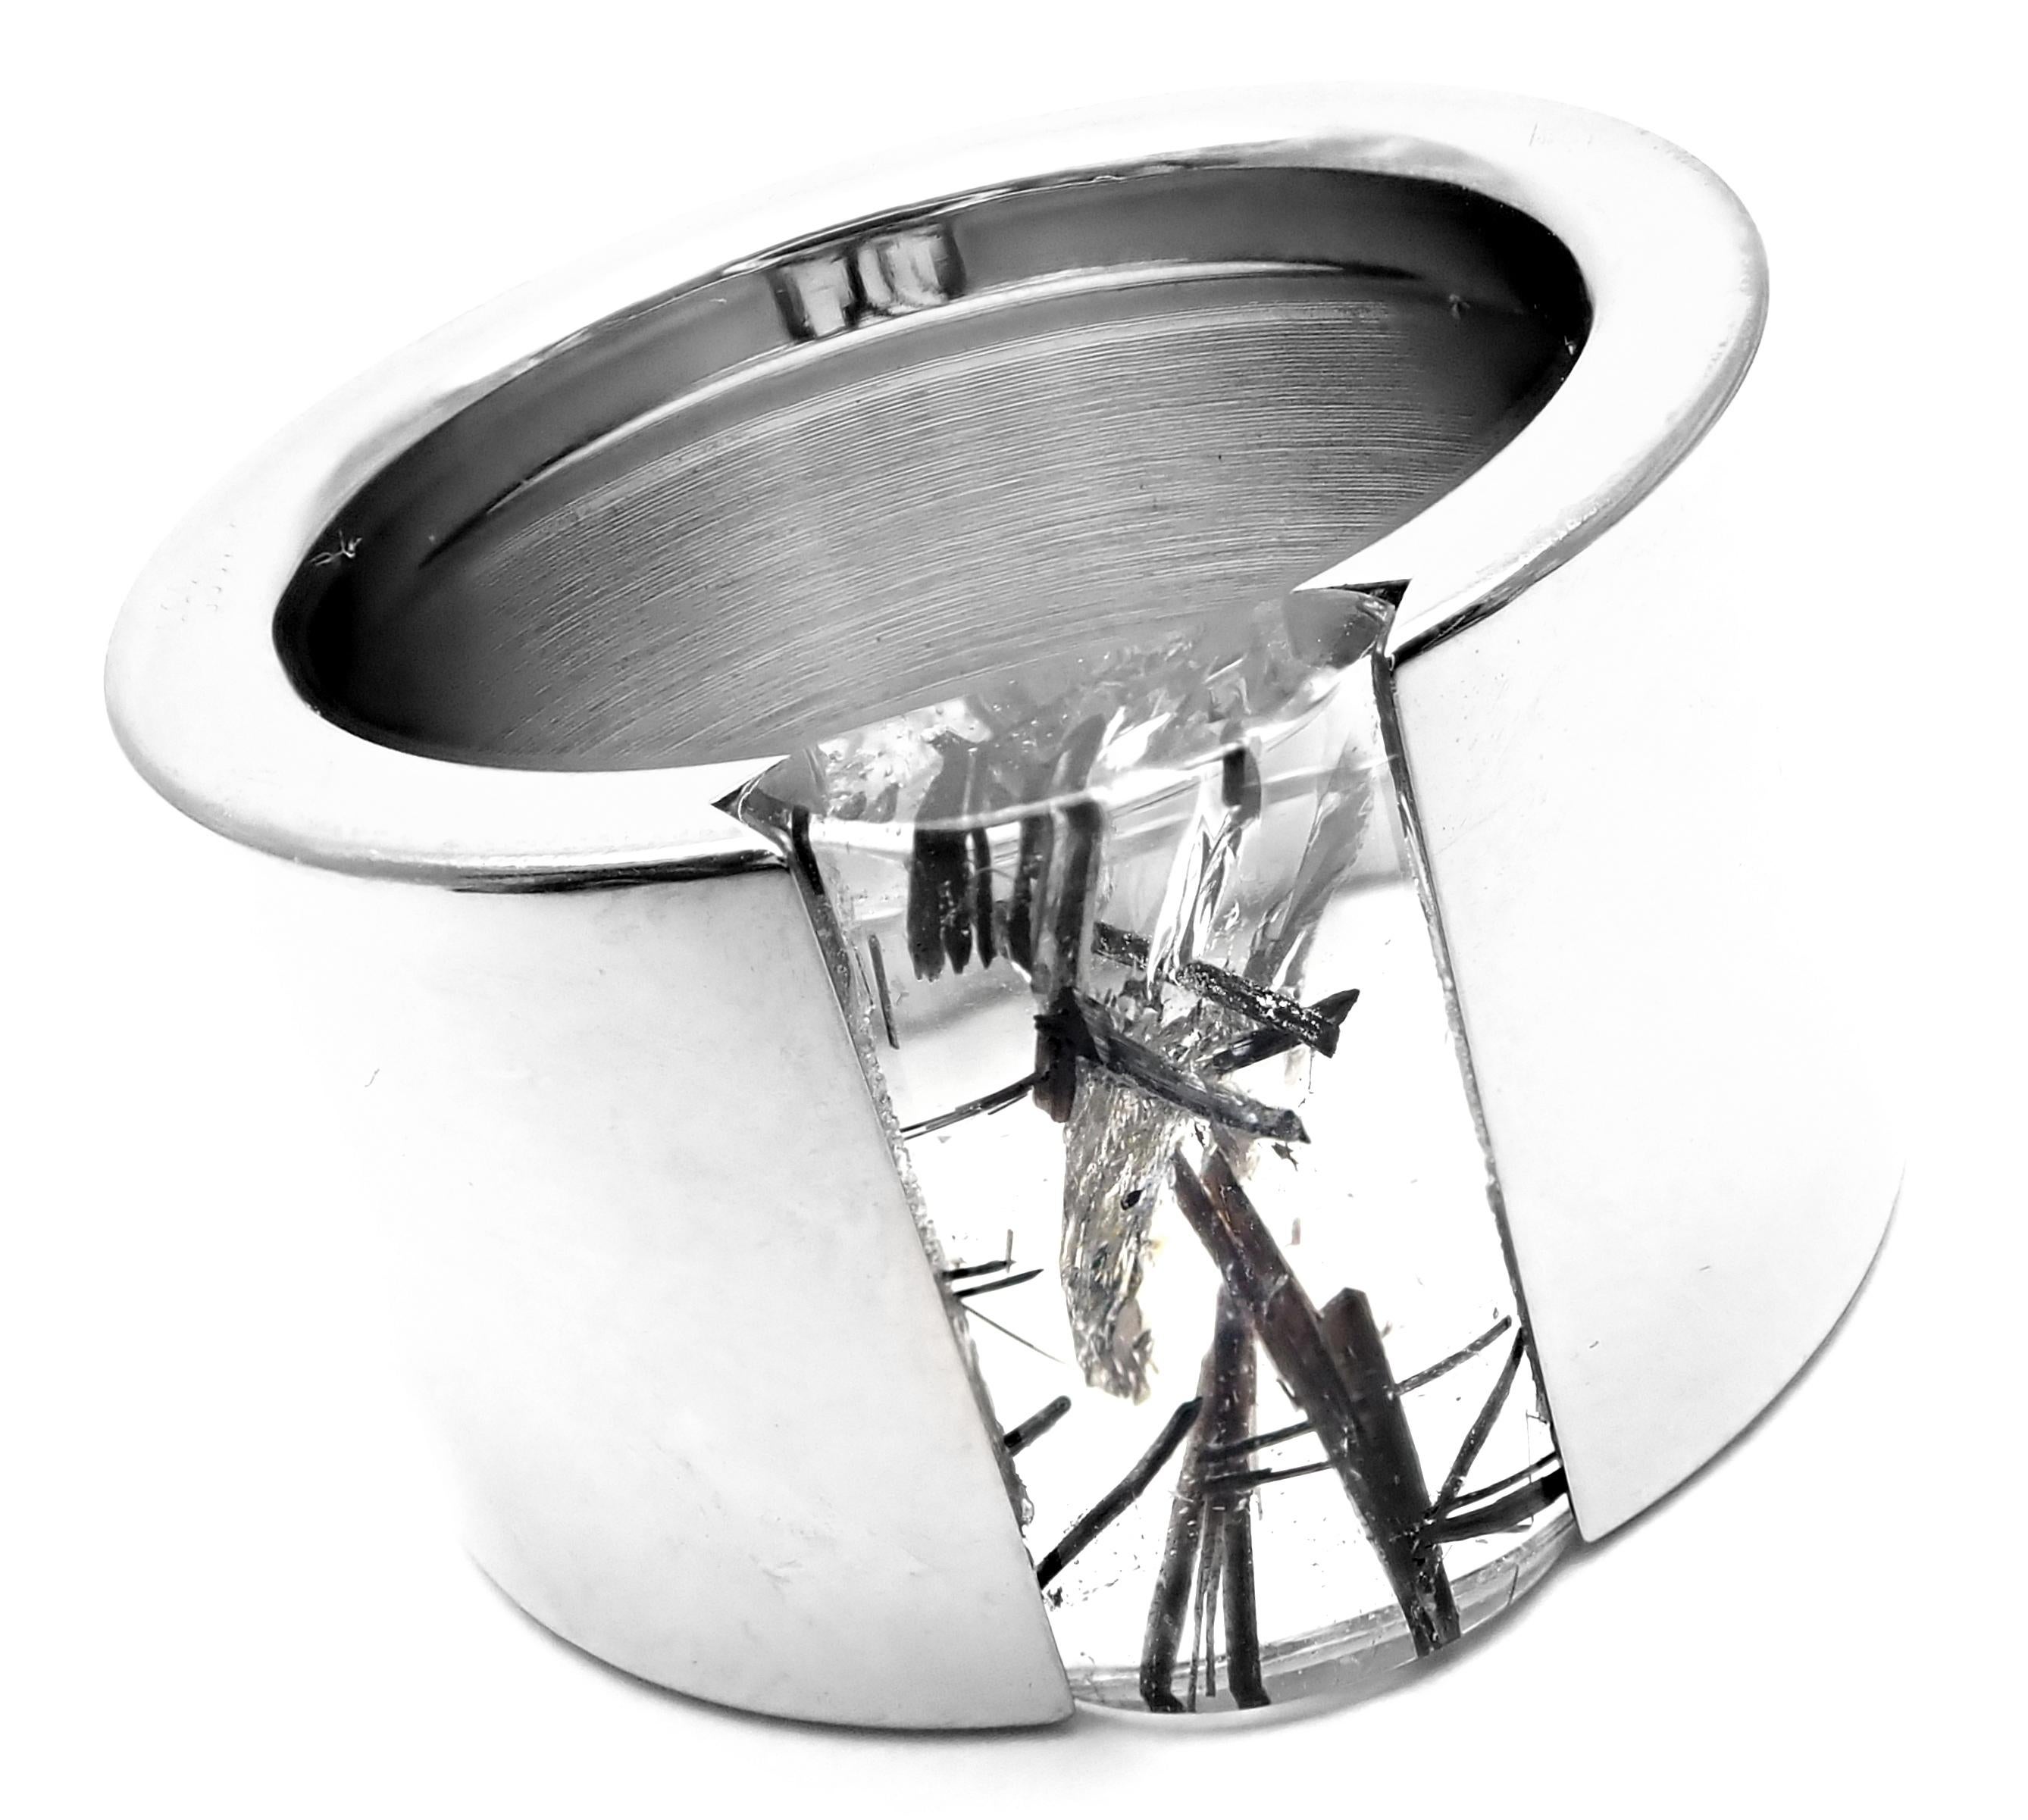 18k White Gold Rutilated Quartz Wide Band Ring by Cartier. 
With 1 x Rutilated Quartz 
Details: 
Ring Size: 8 US, Europe 57
Width: 14mm 
Weight: 20.6 grams
Stamped Hallmarks: Cartier 750 57 1999 H66022
*Free Shipping within the United States*  
YOUR